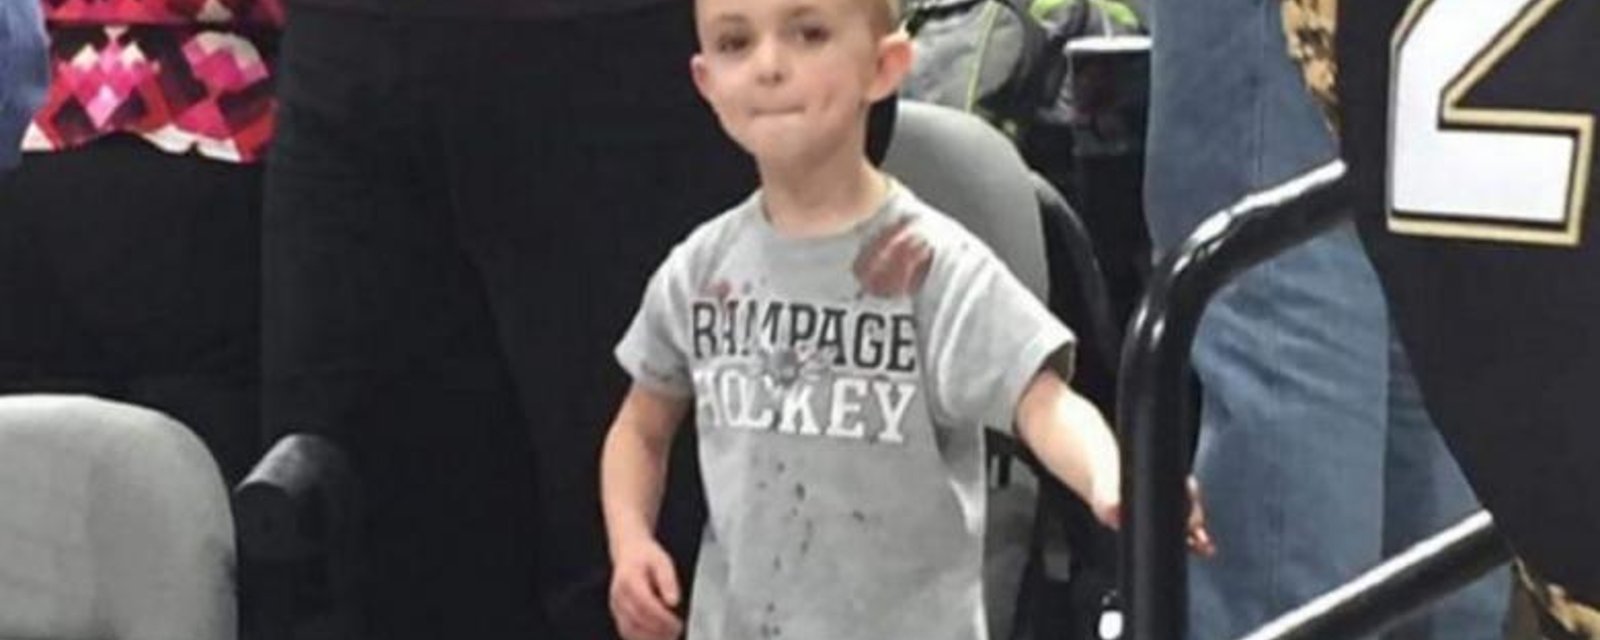 5 year old rushed to ER after being hit by a puck, and responds like a hockey player.